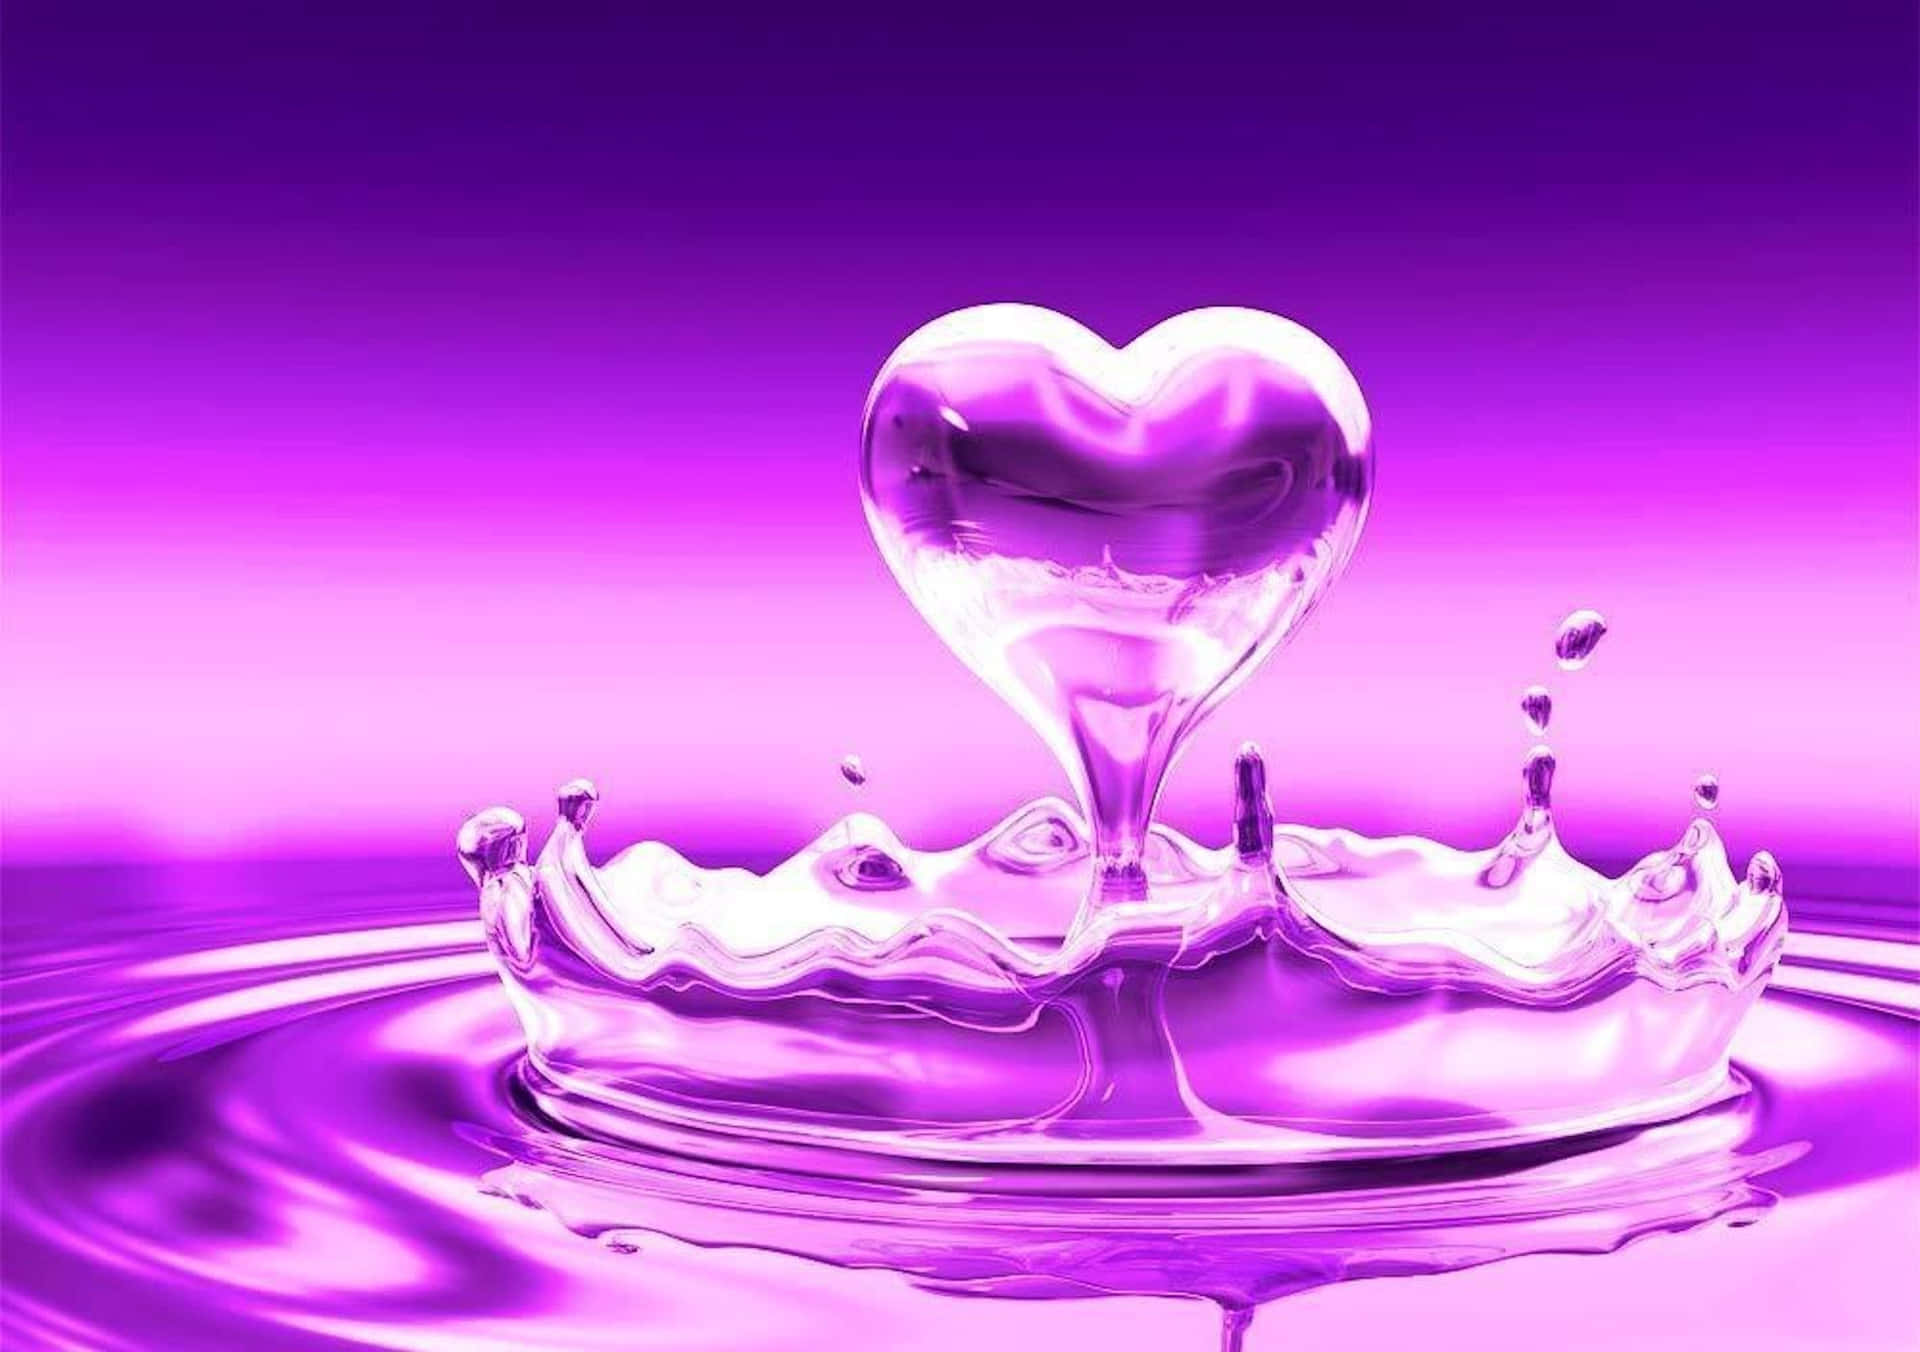 "A delightful combination of pink and purple" Wallpaper